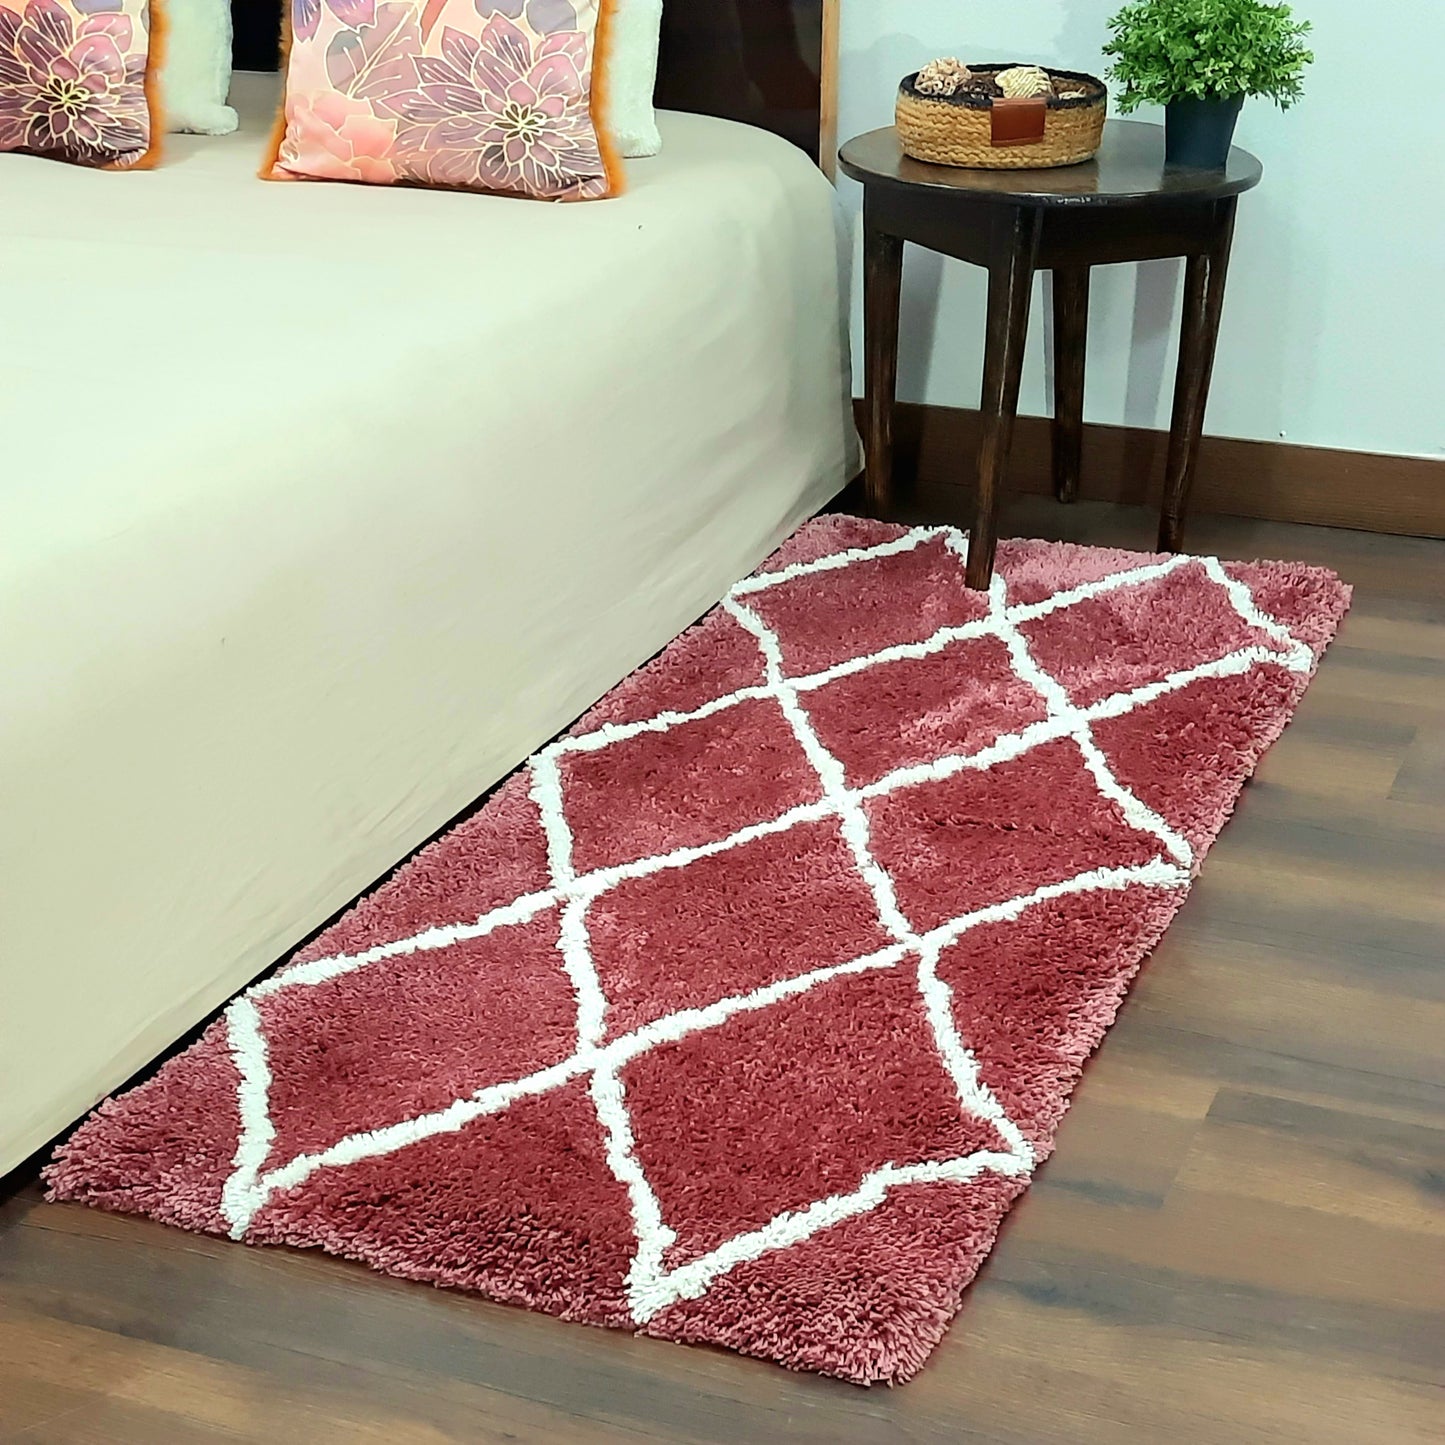 Plush Soft Washable Shaggy Carpet in Wine Color With White Check Design /Bedside Runners by Avioni Home